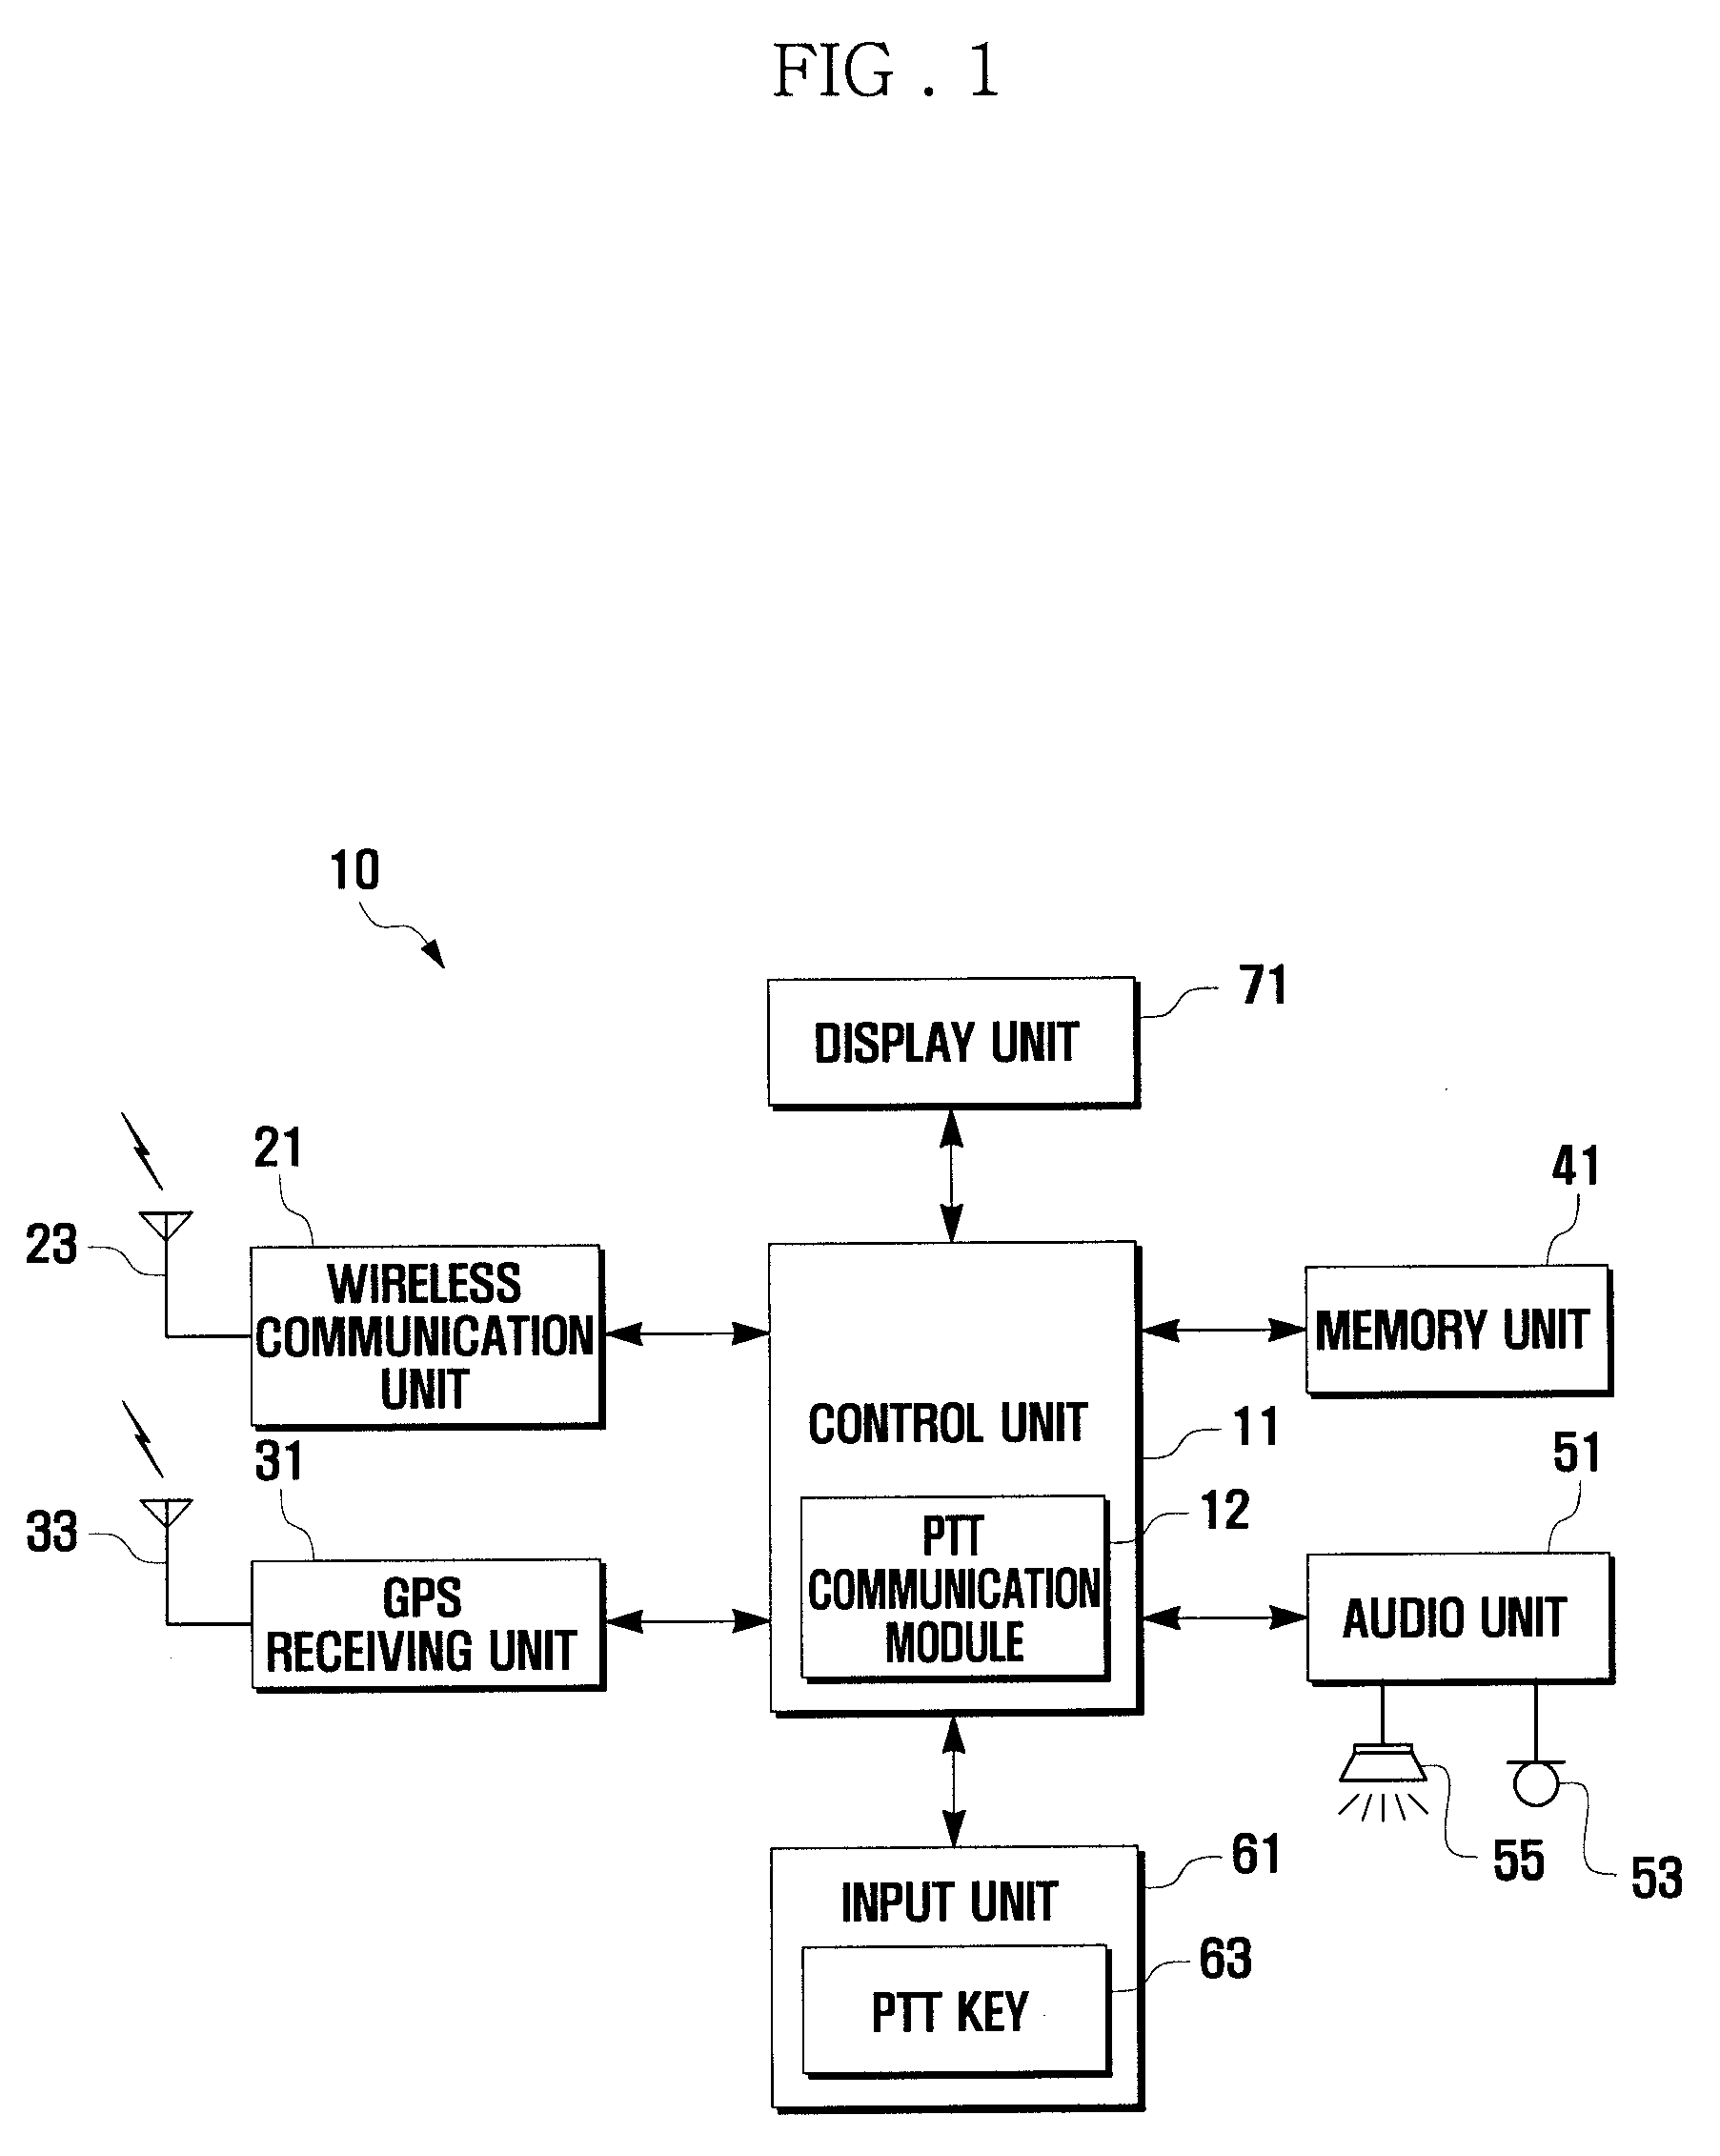 Ptt-enabled mobile terminal, ptt service providing system, and sender location display method